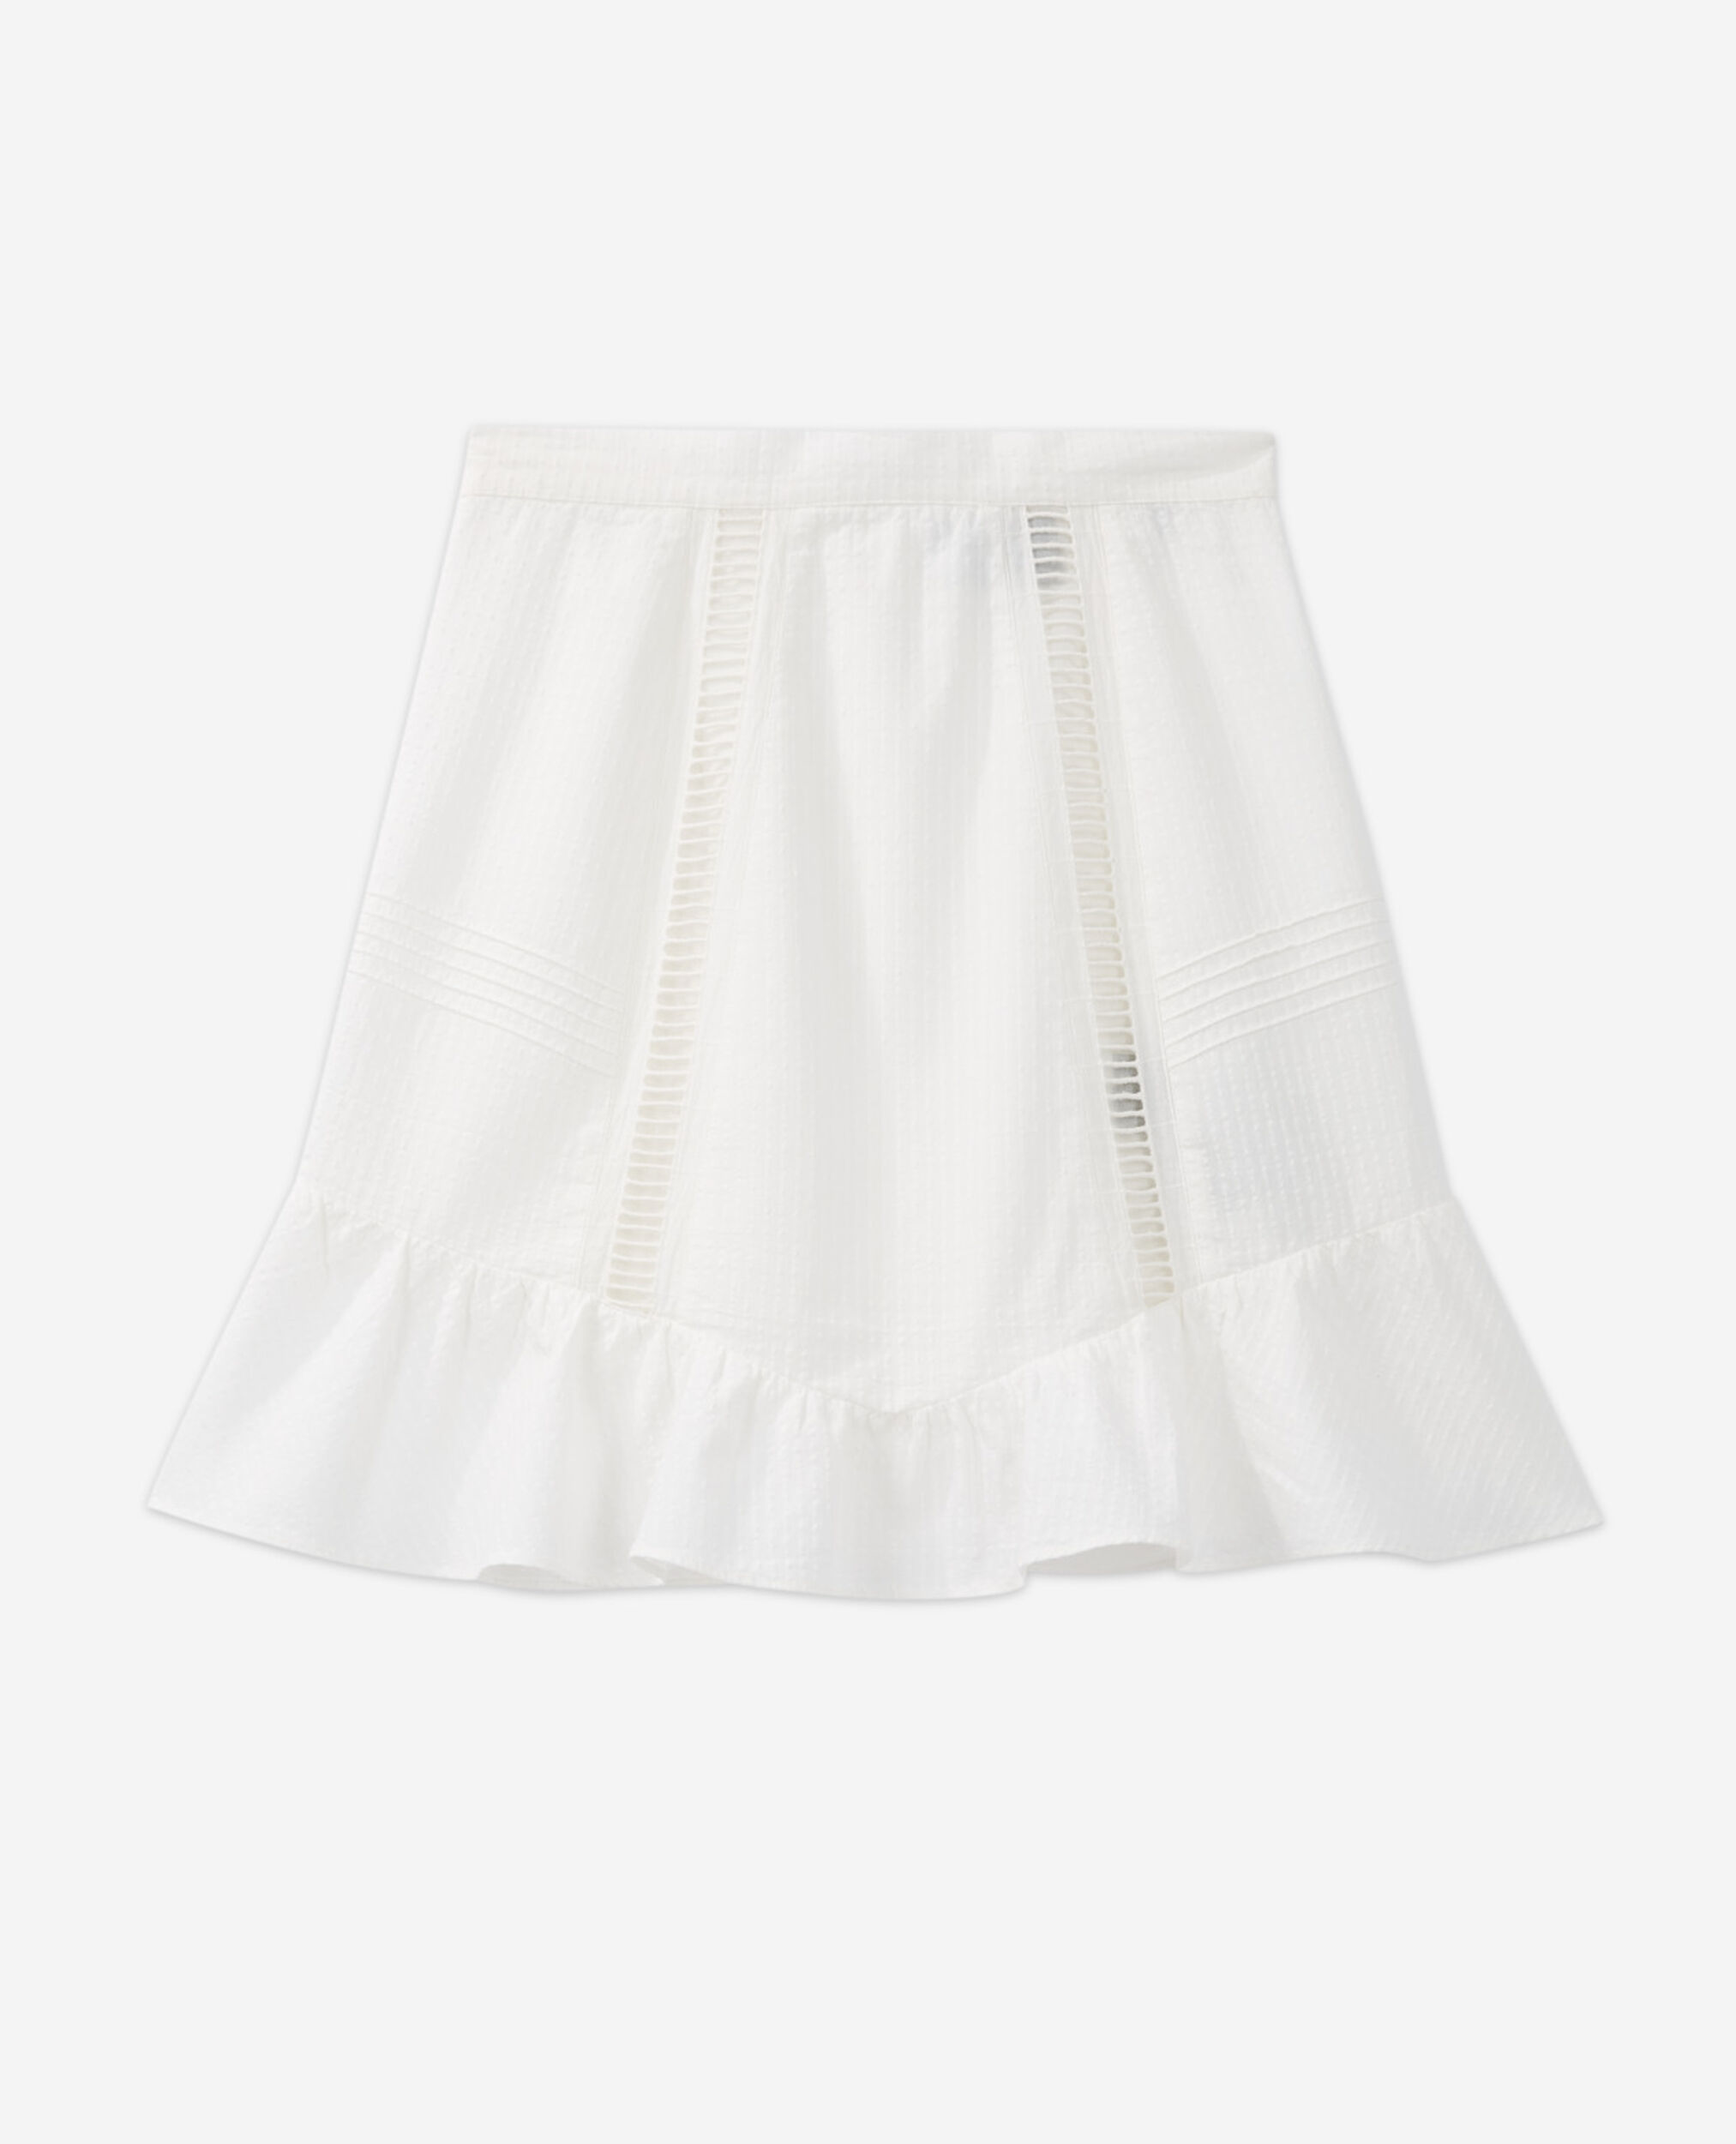 Jupe courte écrue coton broderie anglaise, OFF WHITE, hi-res image number null